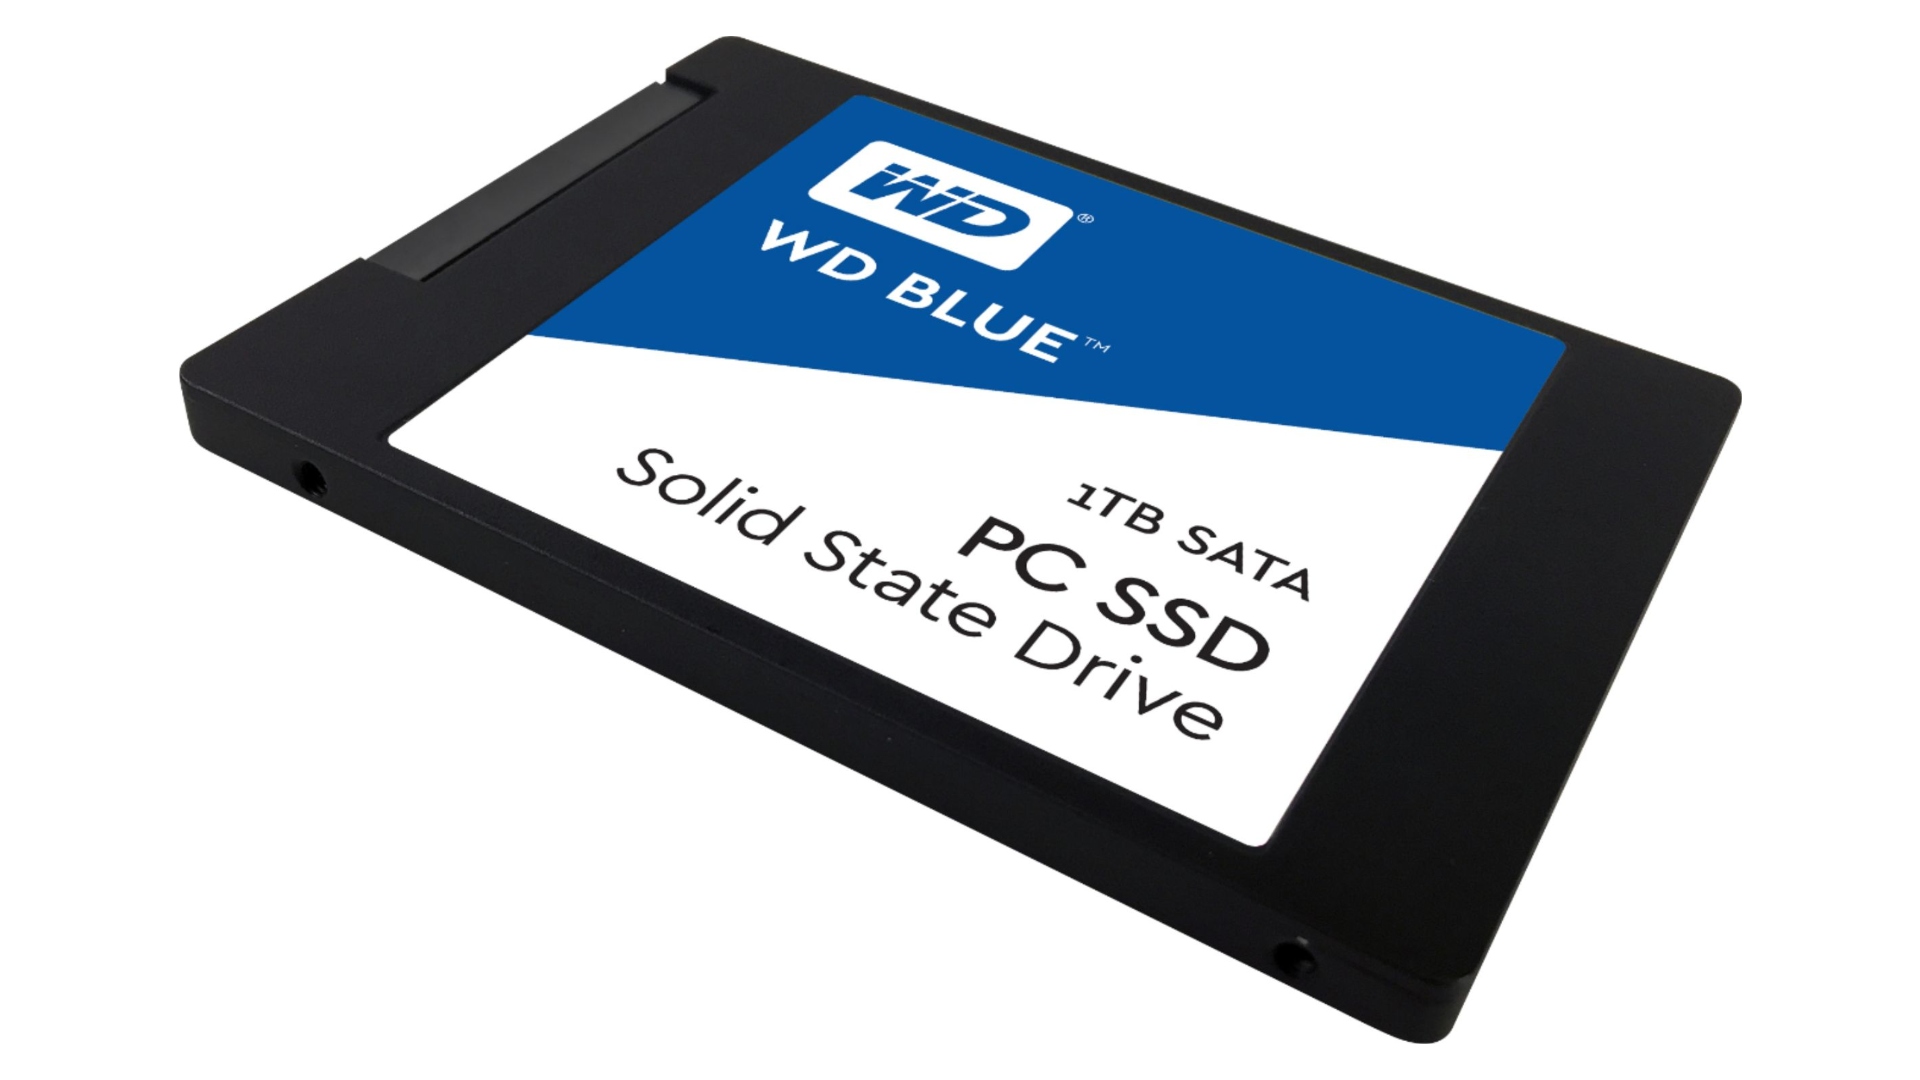 Grab 50% off a WD Blue 1TB SSD to store your Christmas game haul in style